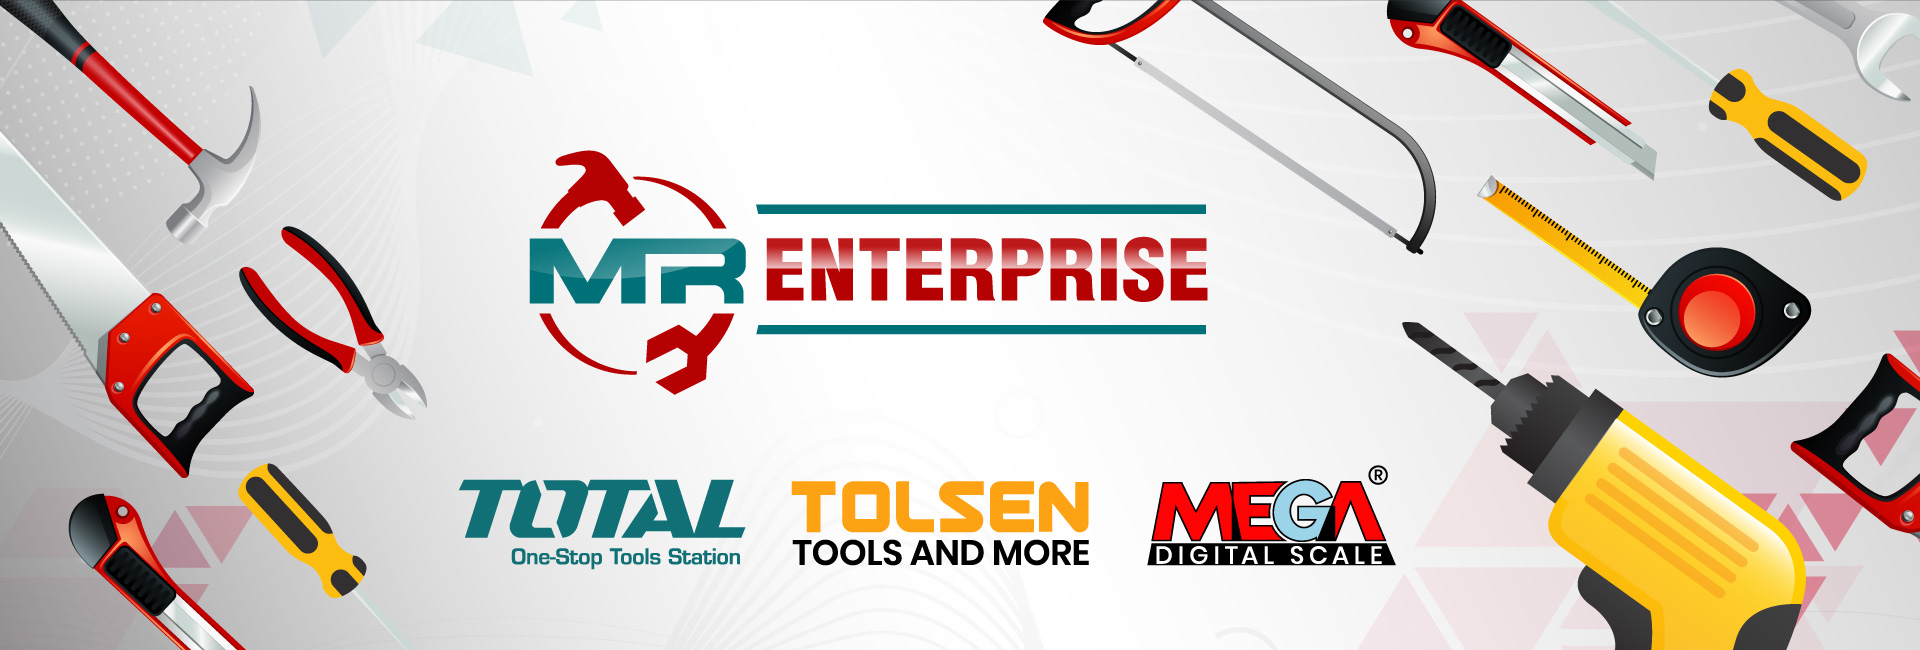 welcome to enterprise tools3m